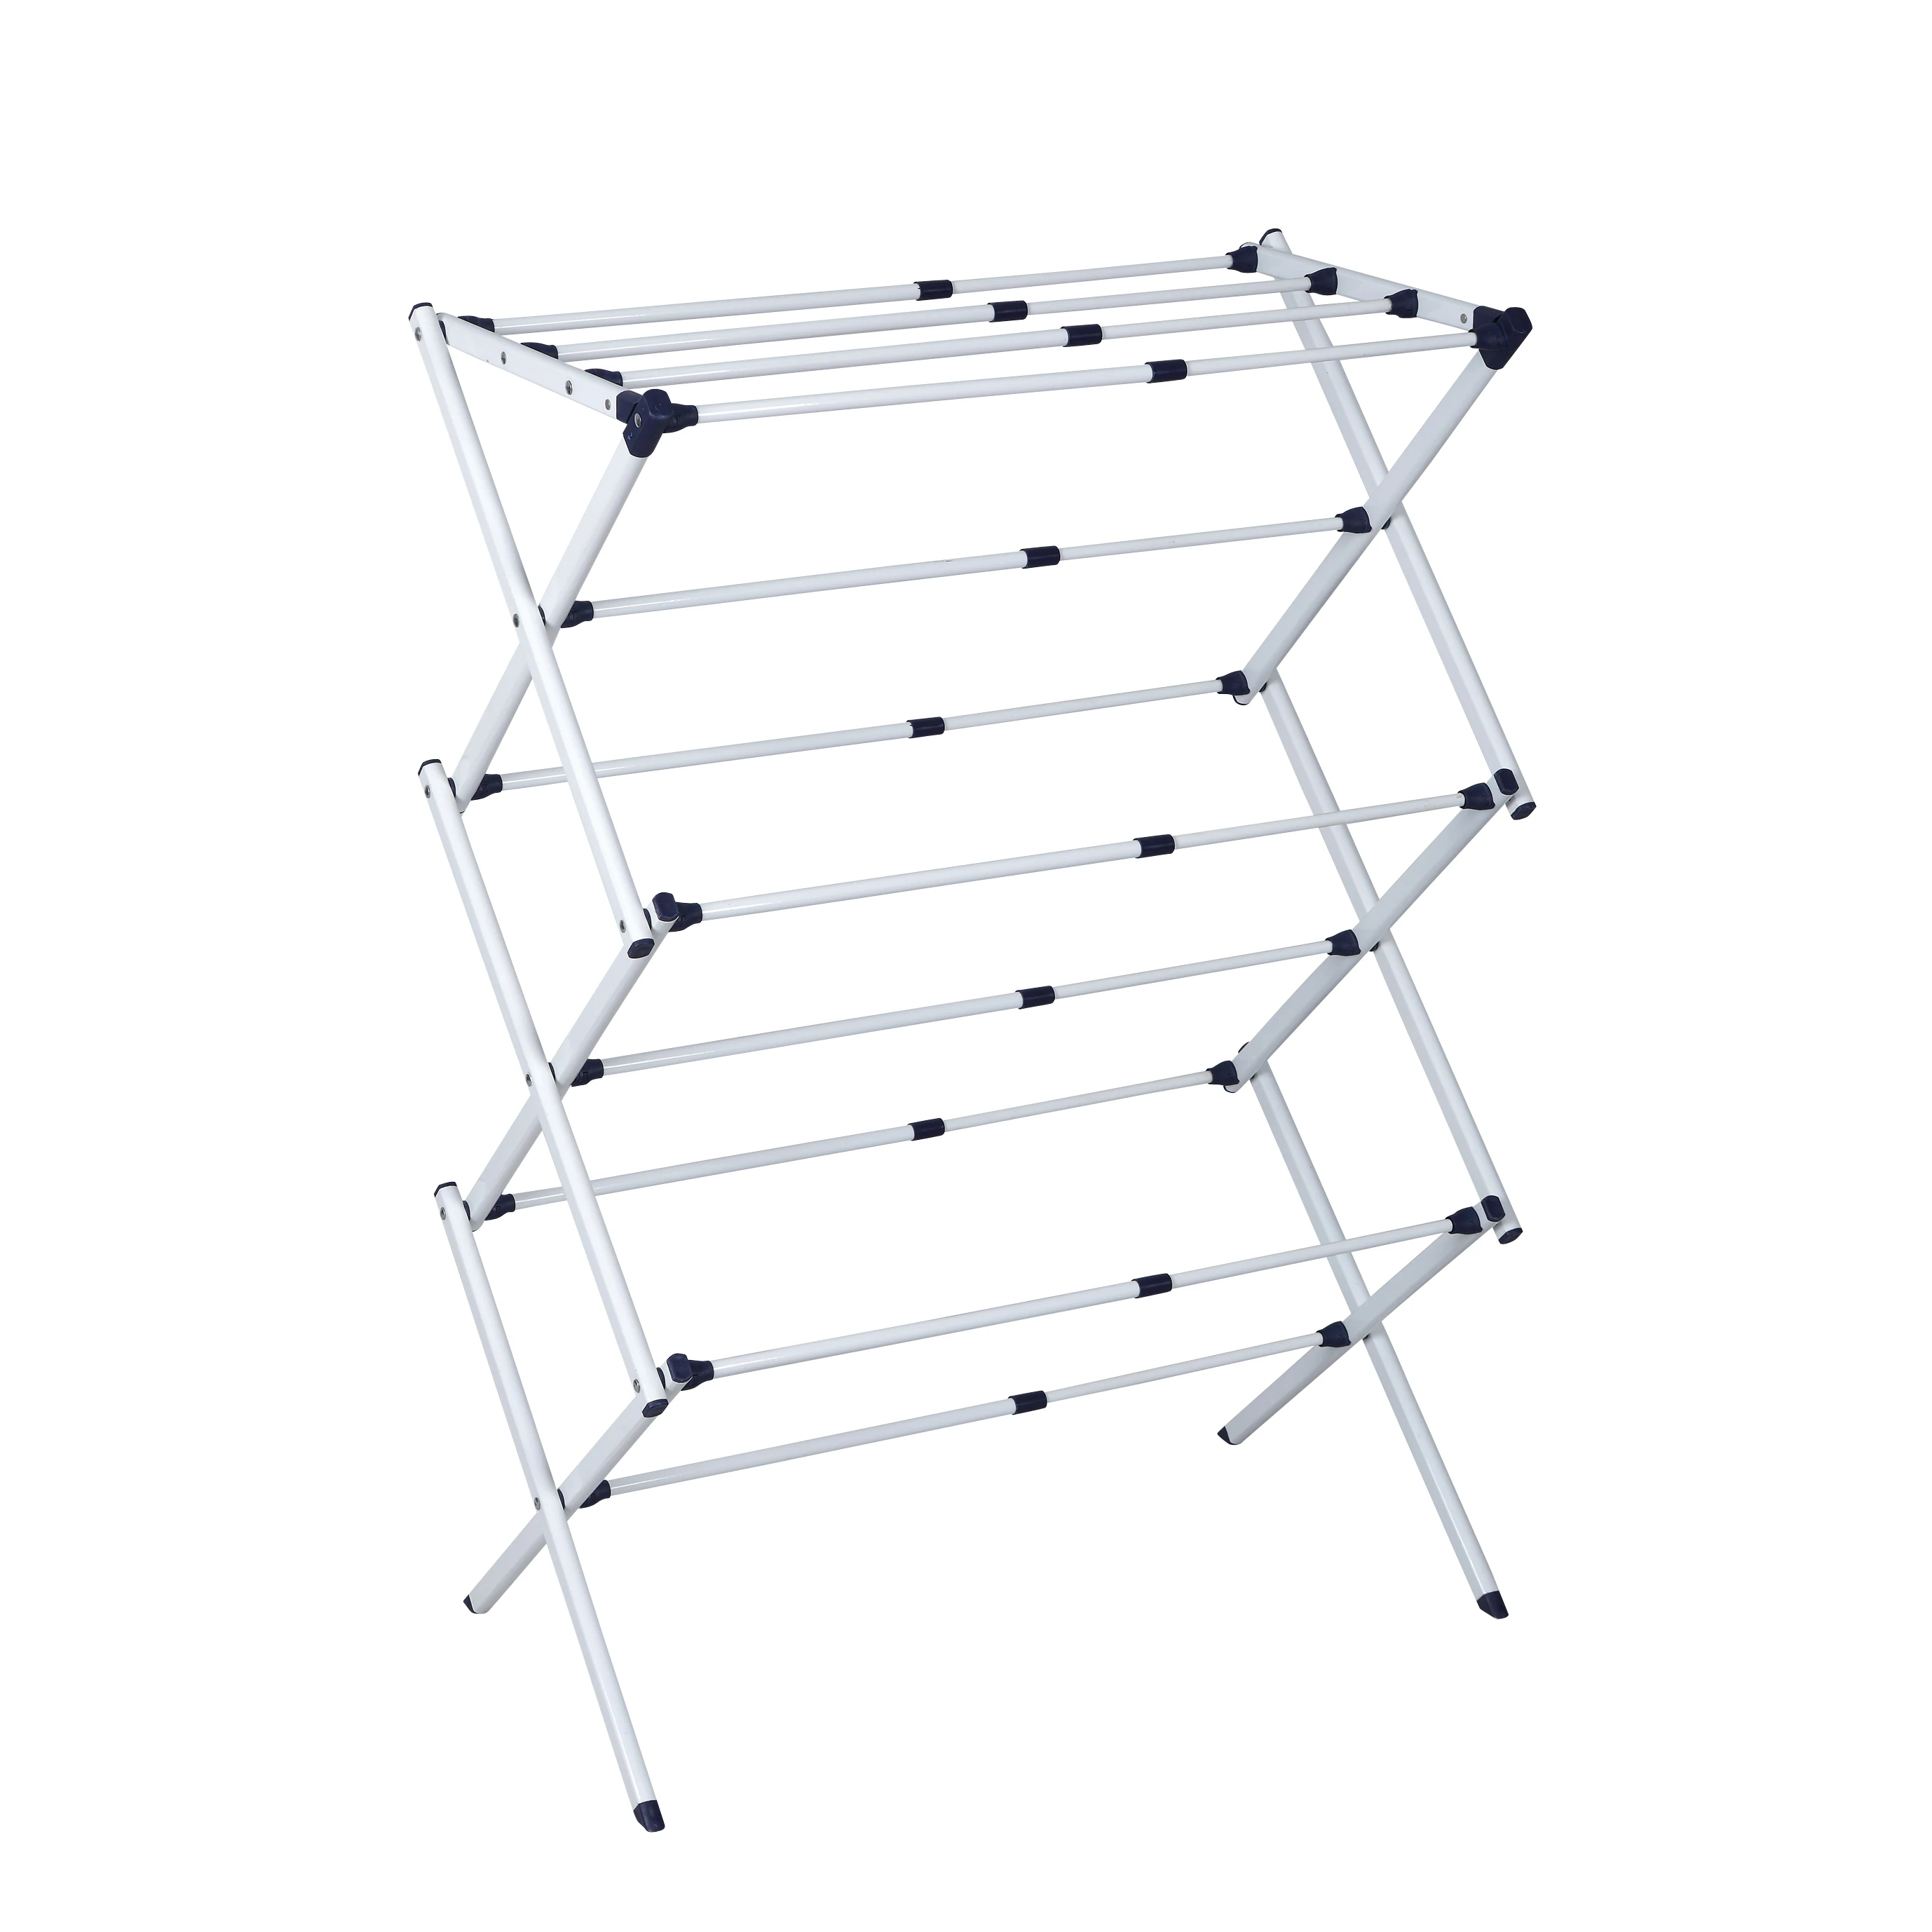 3 TIER FOLDING METAL 12M CONCERTINA CLOTHES TOWEL AIRER DRYER DRYING RACK STAND by CLOTHES AIRER 